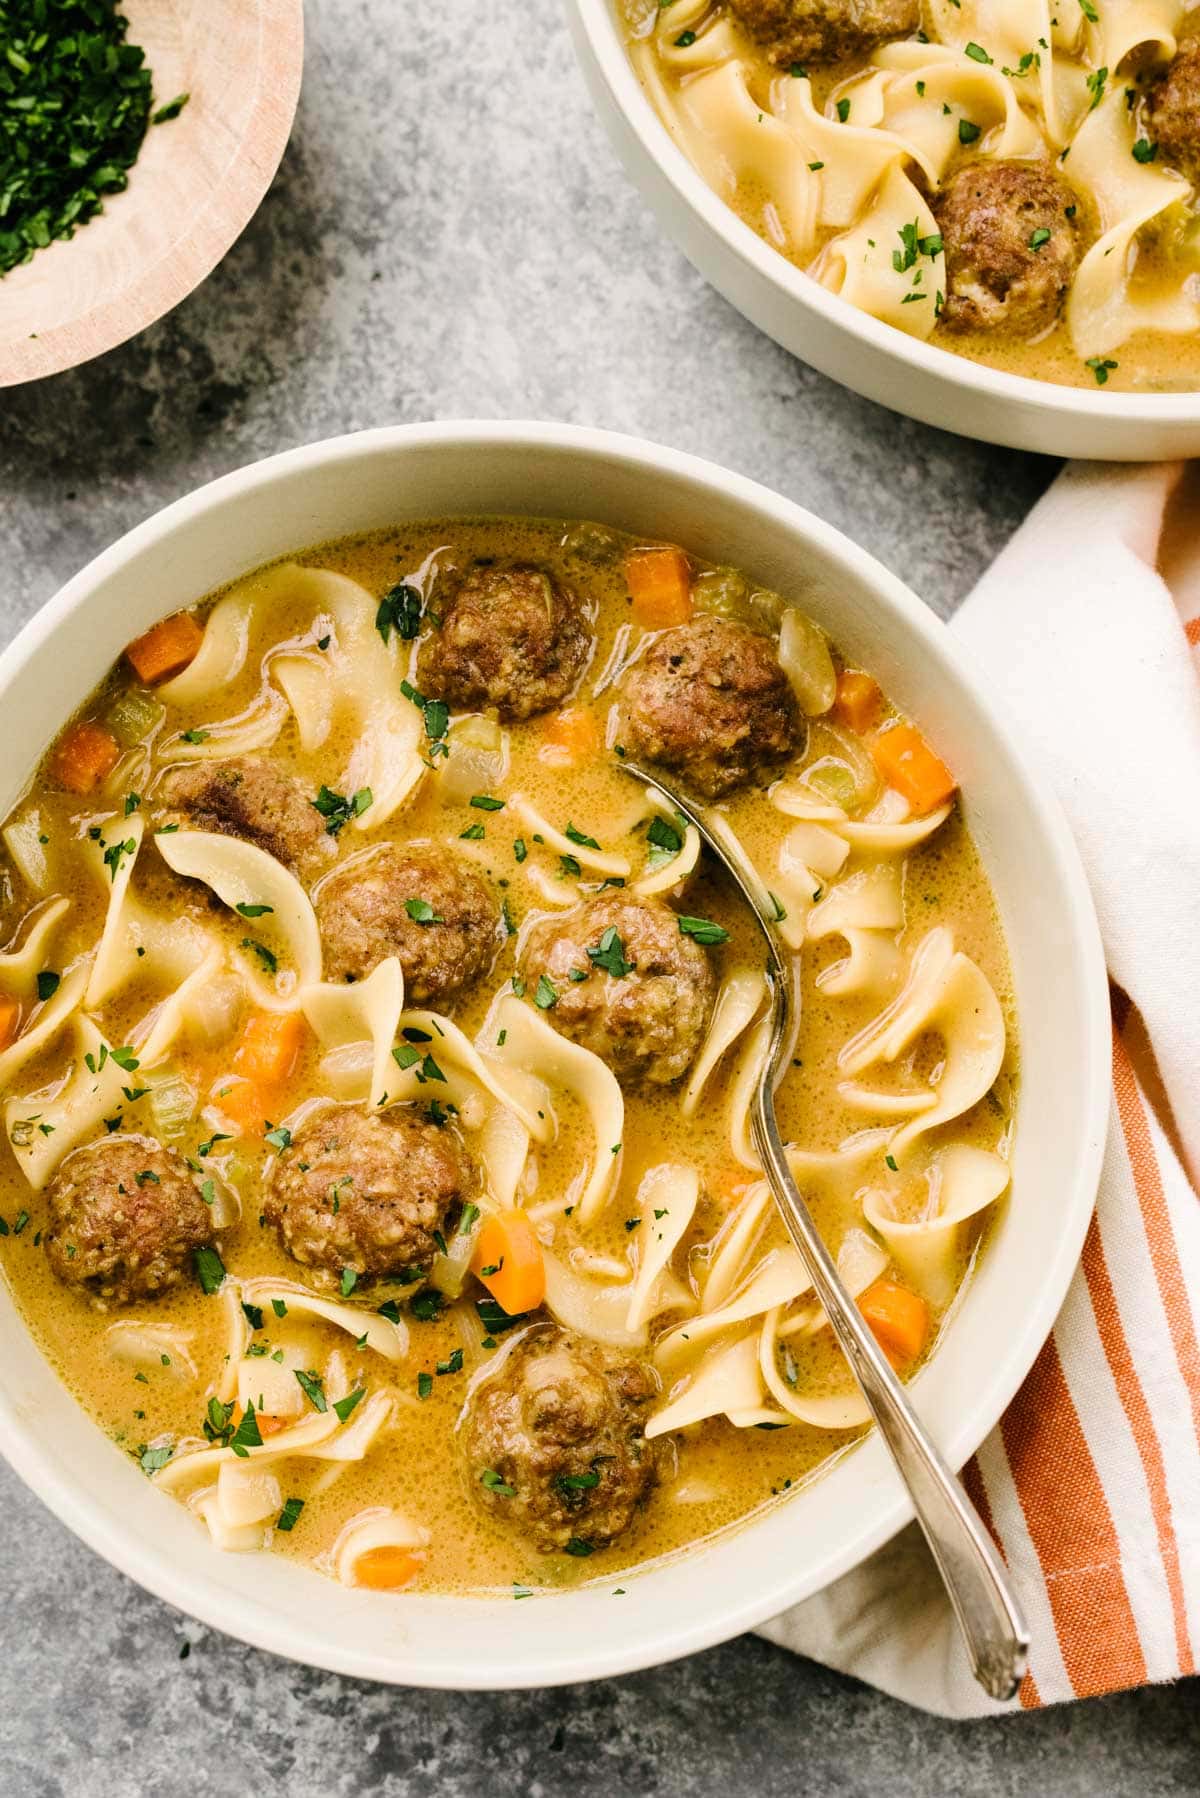 Two bowls of Swedish meatball soup garnished with fresh parsley with a striped linen napkin to the side.